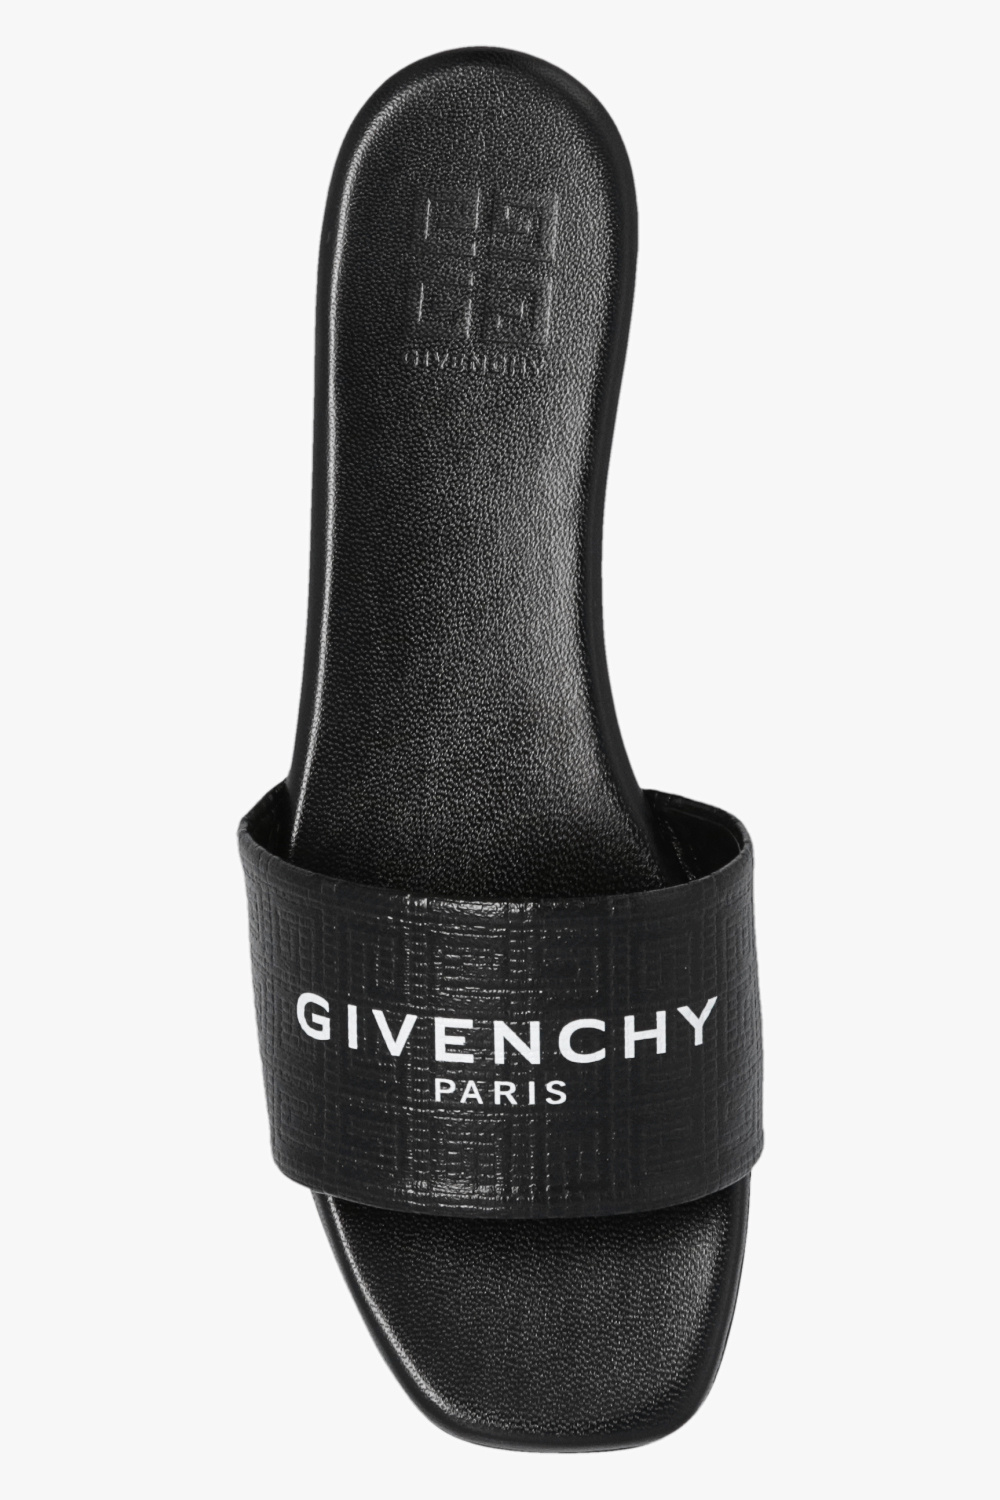 Givenchy Парфуми givenchy play